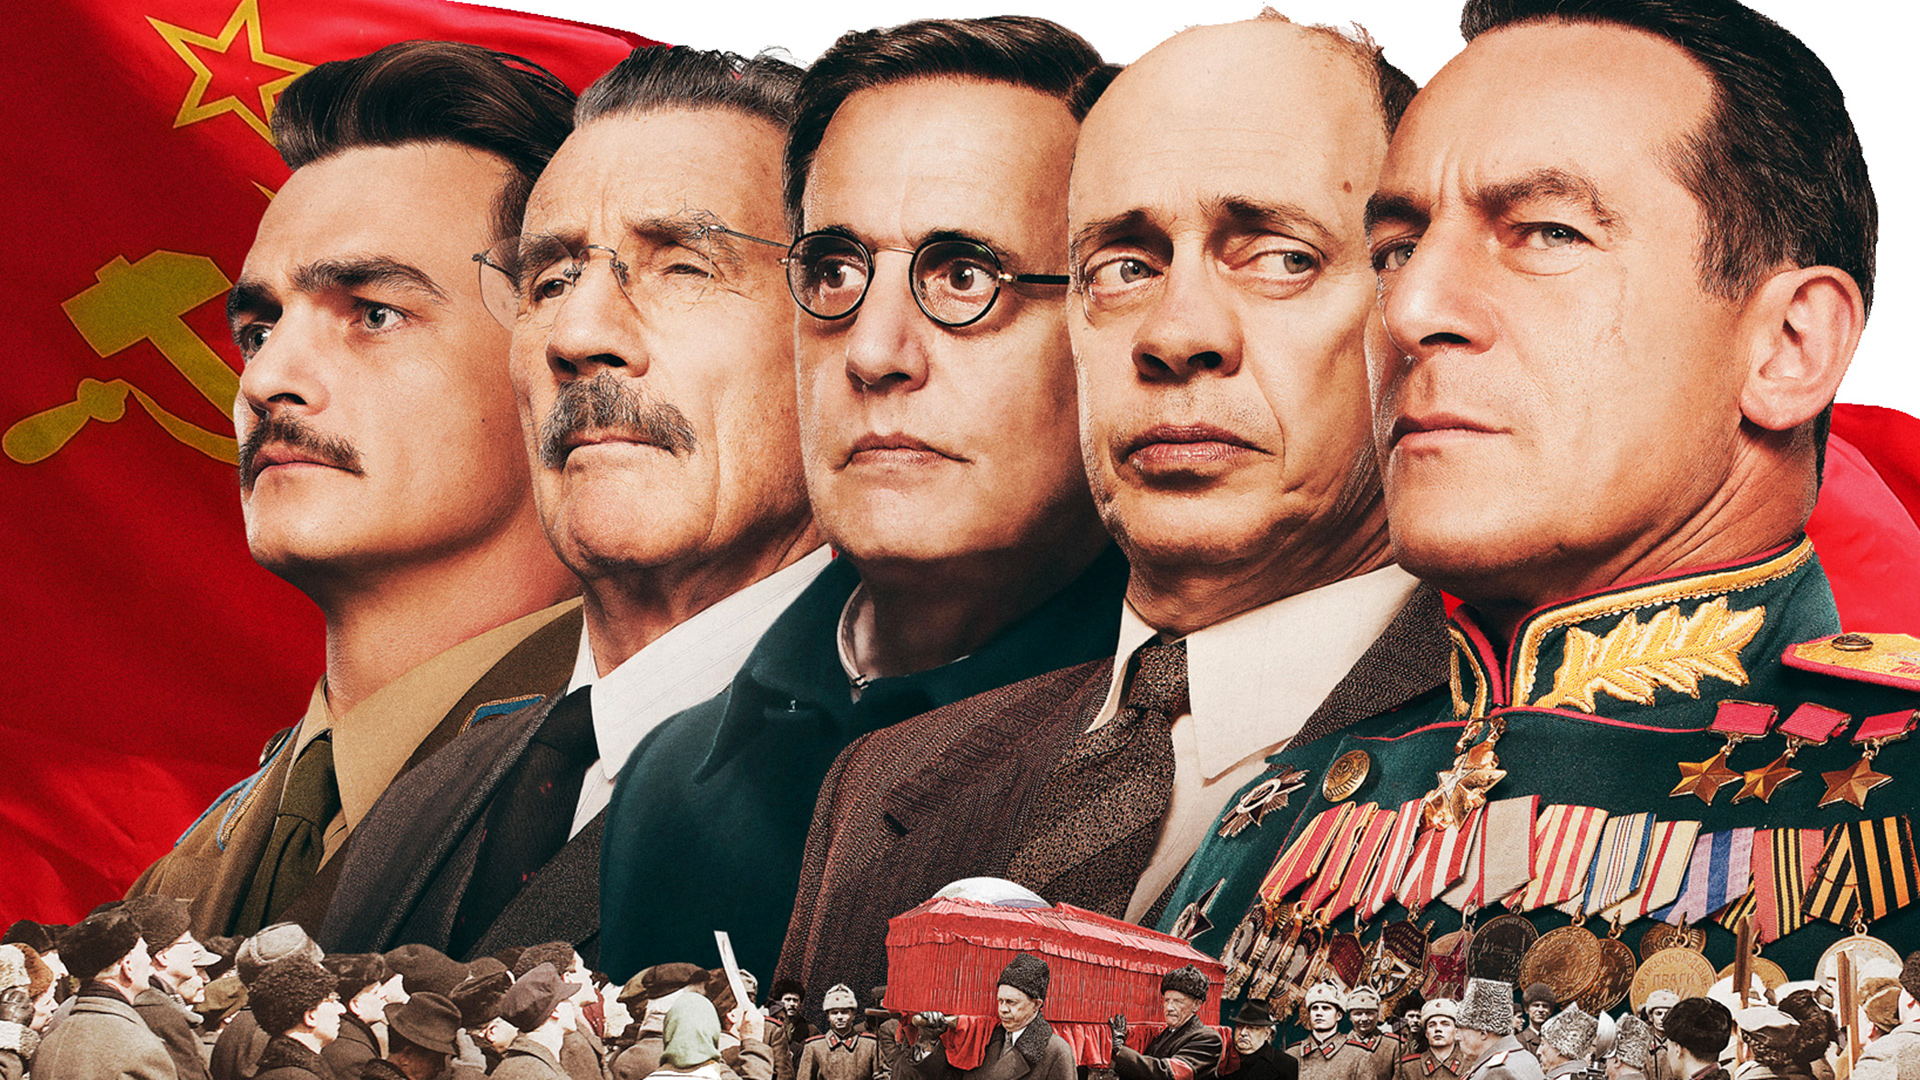 The Death of Stalin (2017) Review – Chillingly Funny